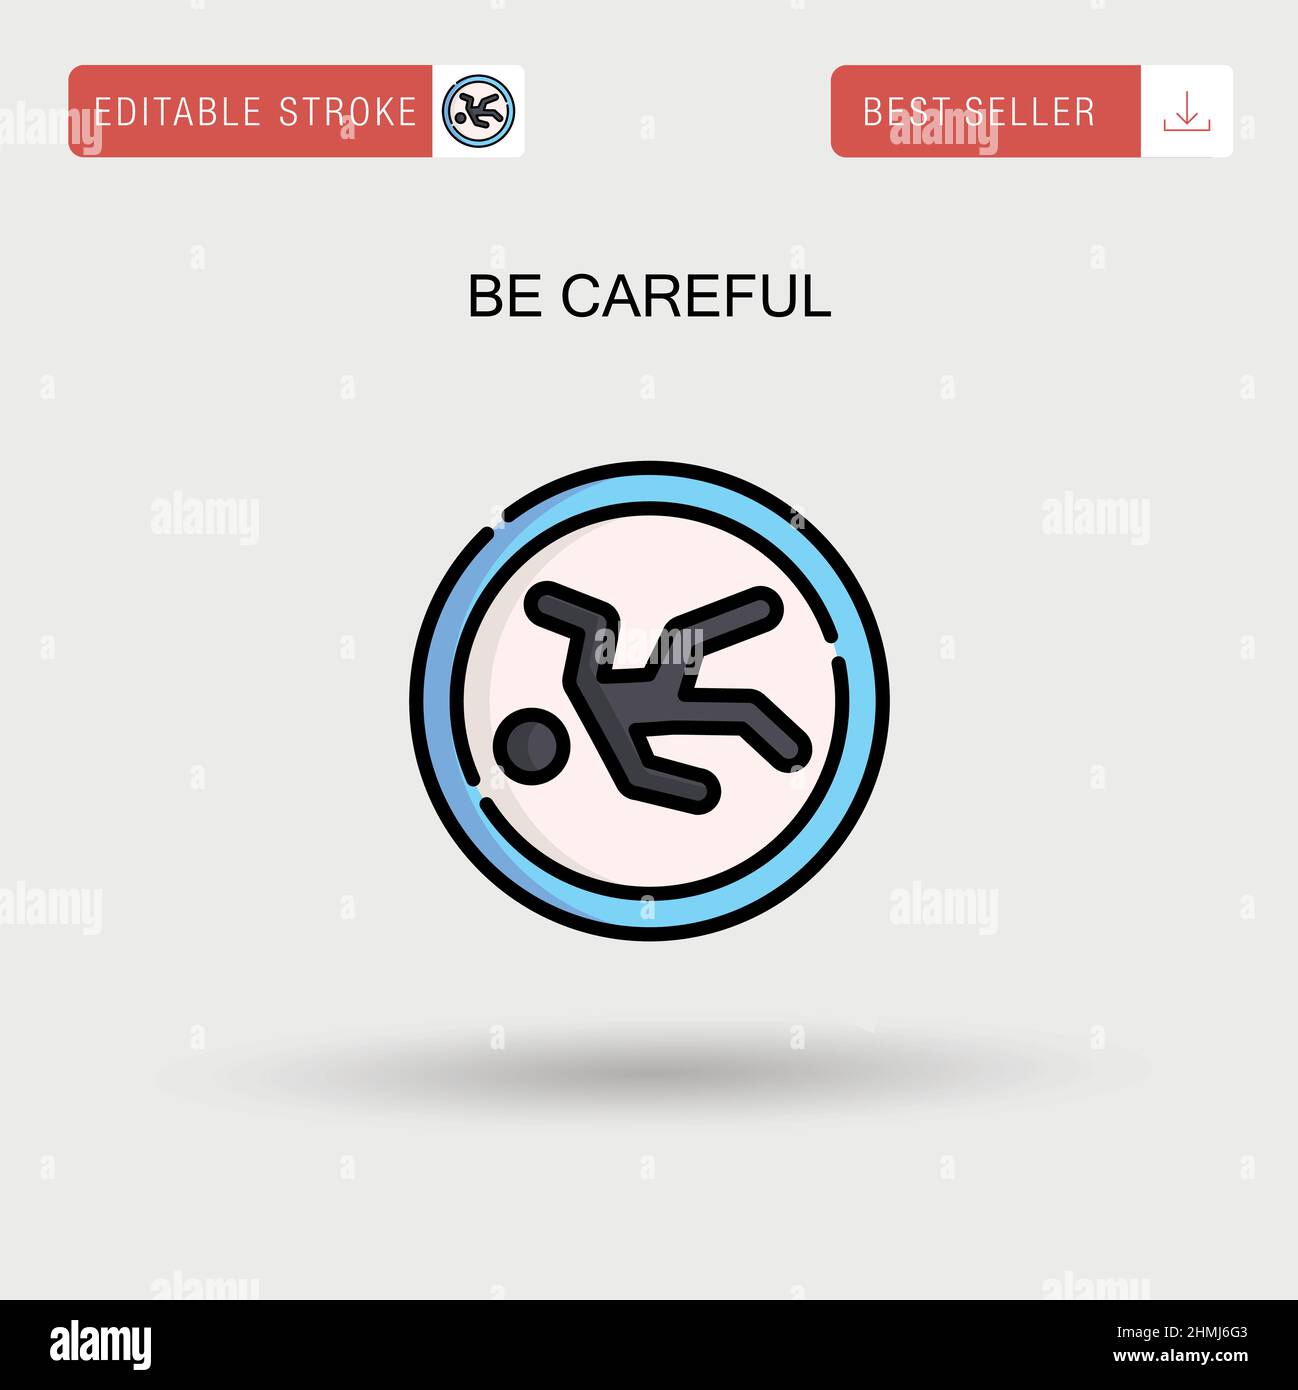 Be careful Simple vector icon. Stock Vector